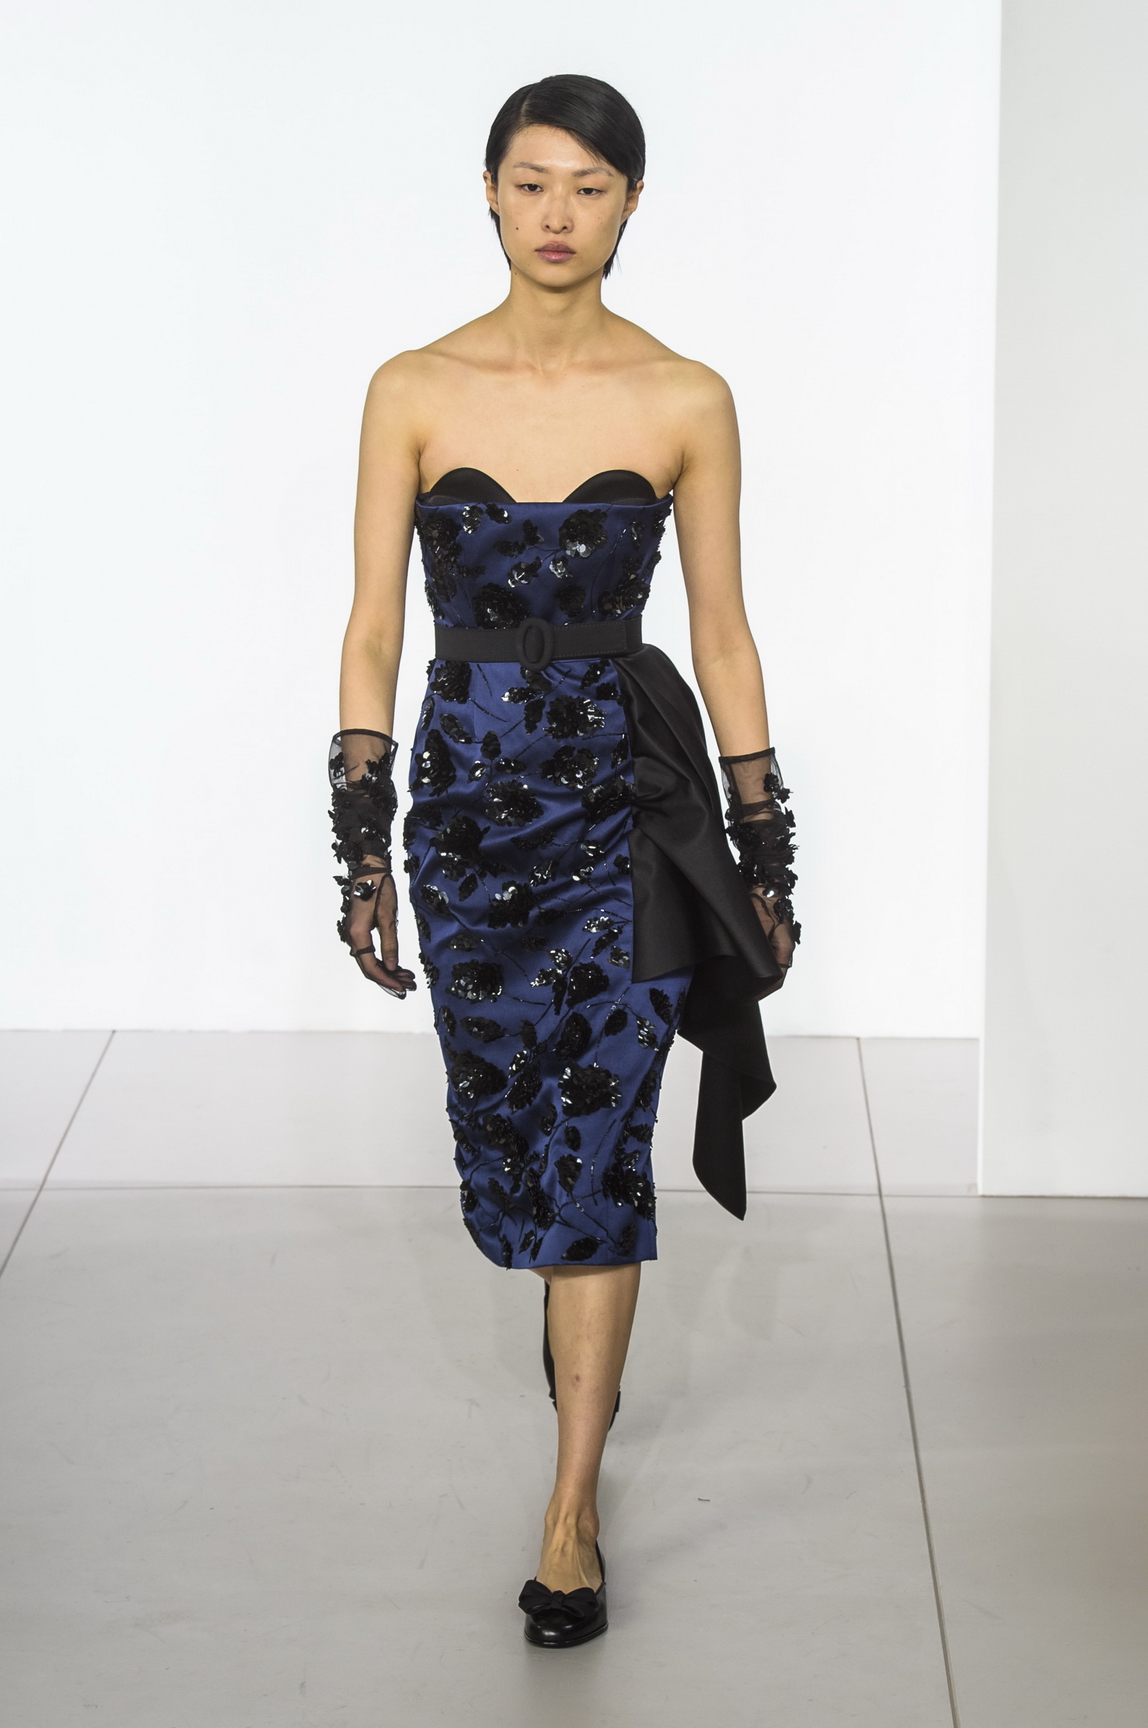 michael kors’ tribute to the women of nyc - i-D